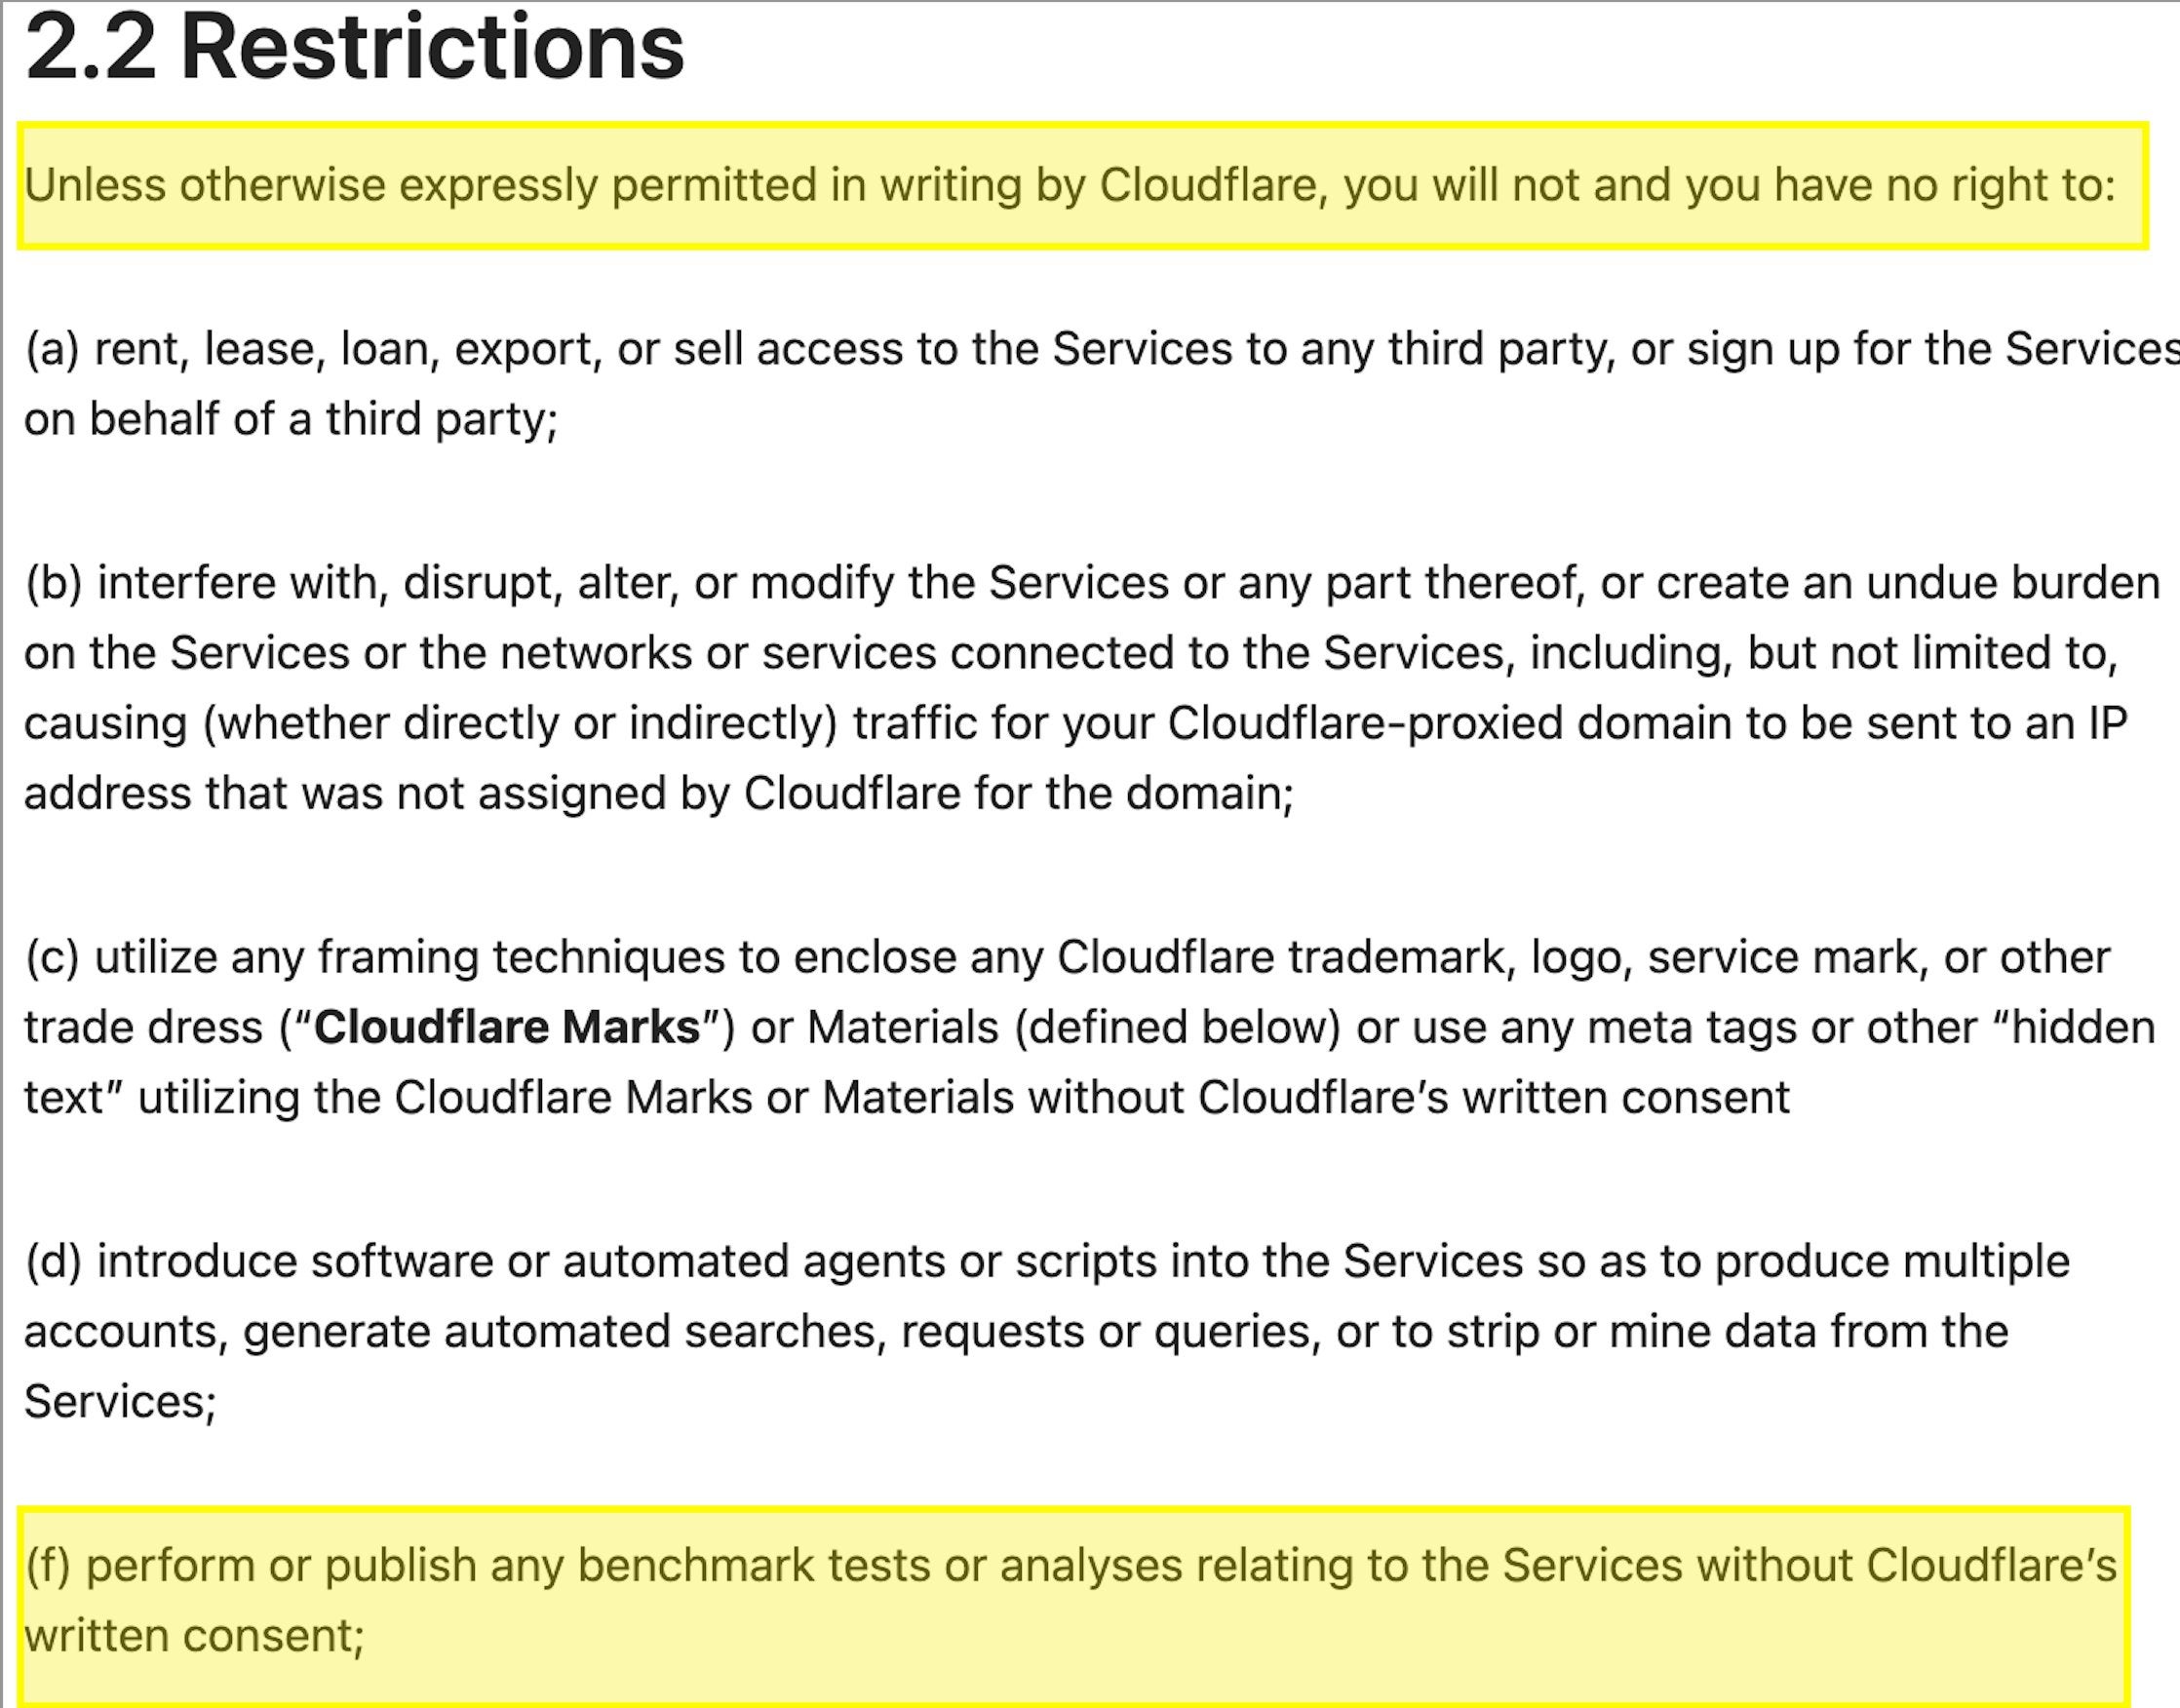 Cloudflare's terms of use